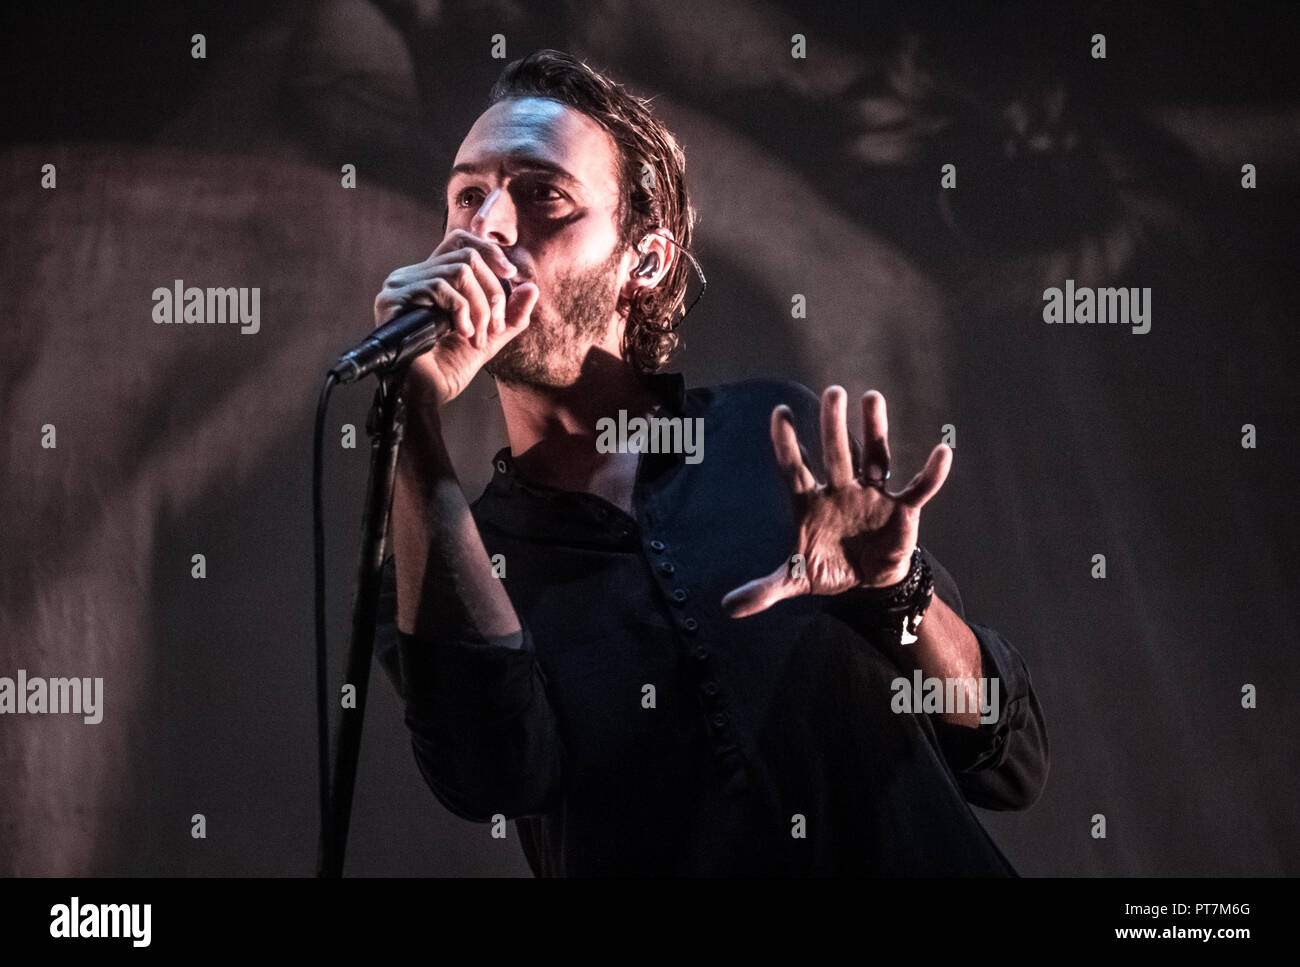 Southampton, UK. 7th October, 2018. Tom Smith of Editors performing live on the first night of their October UK tour at o2 Southampton Guildhall, UK. Credit: Nikki Courtnage/Alamy Live News. Stock Photo